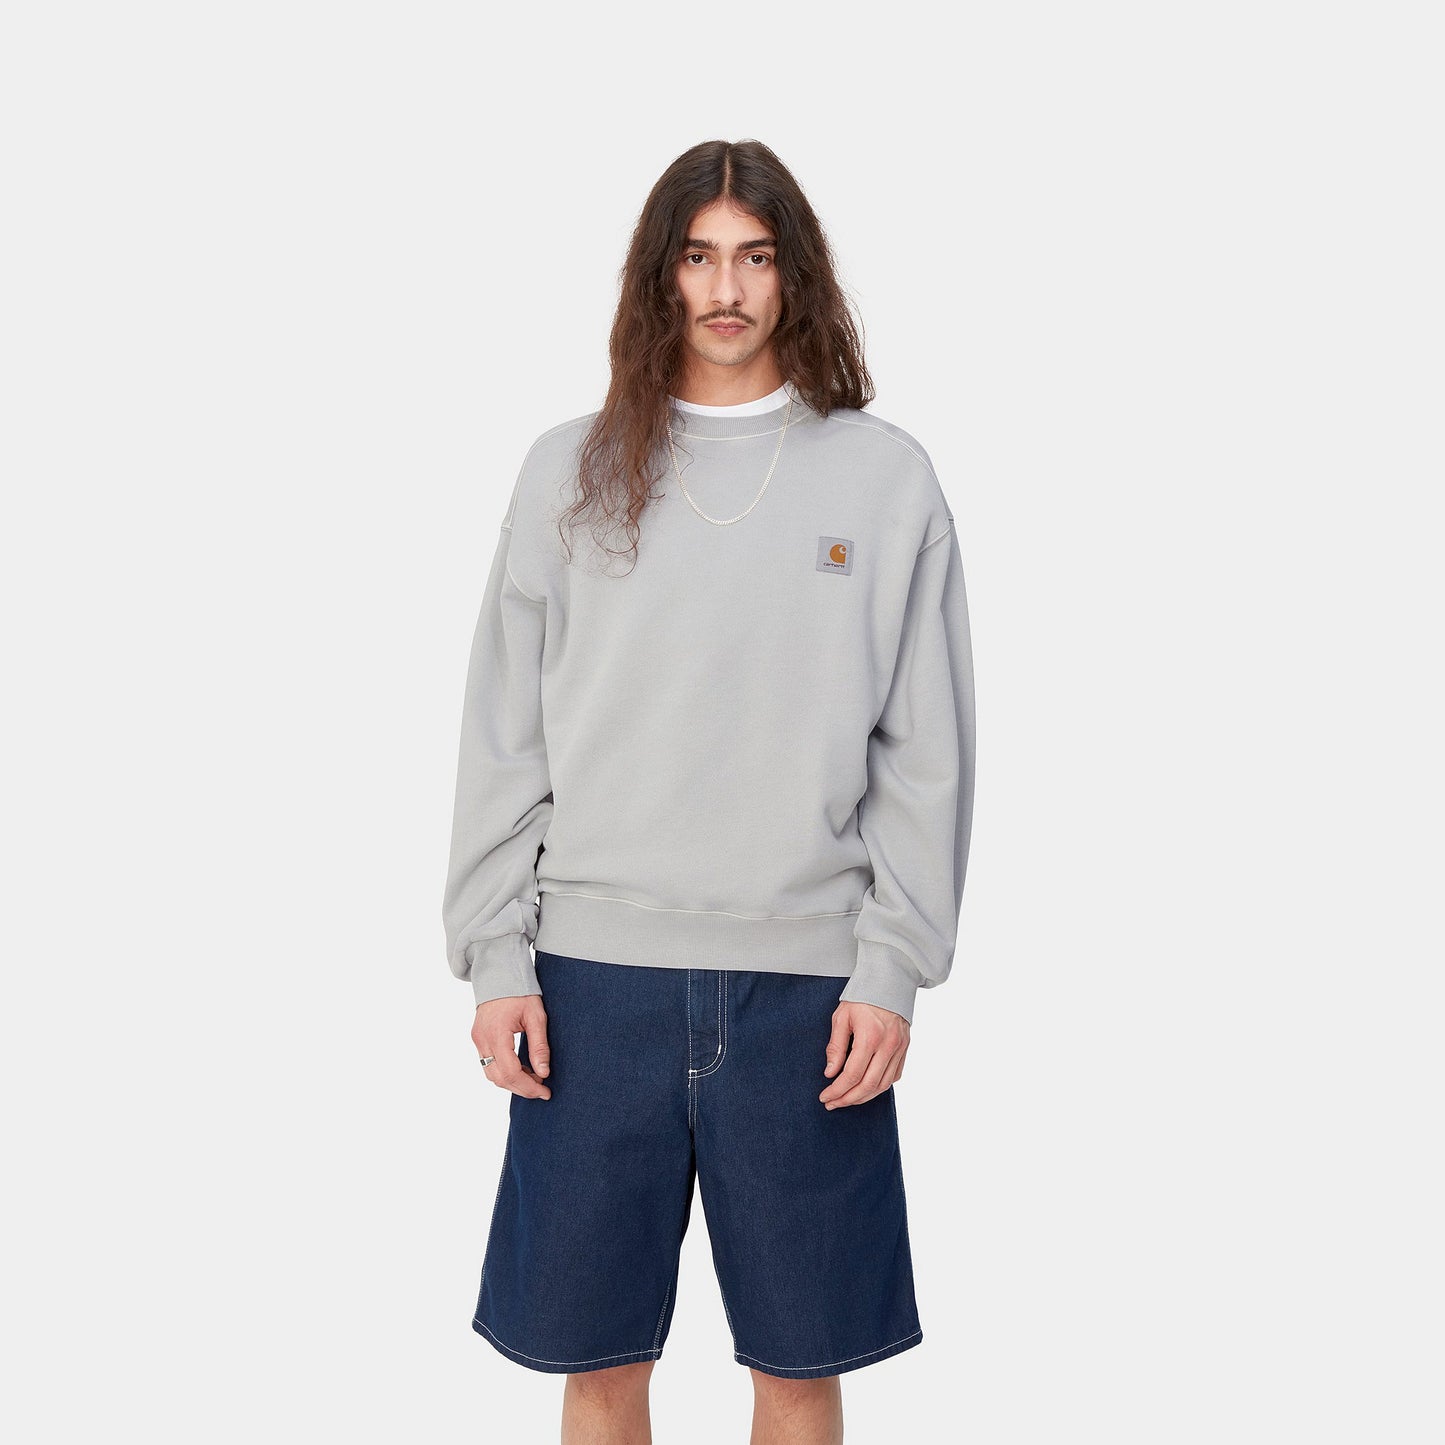 Carhartt WIP Nelson Sweater Sonic Silver Garment Dyed